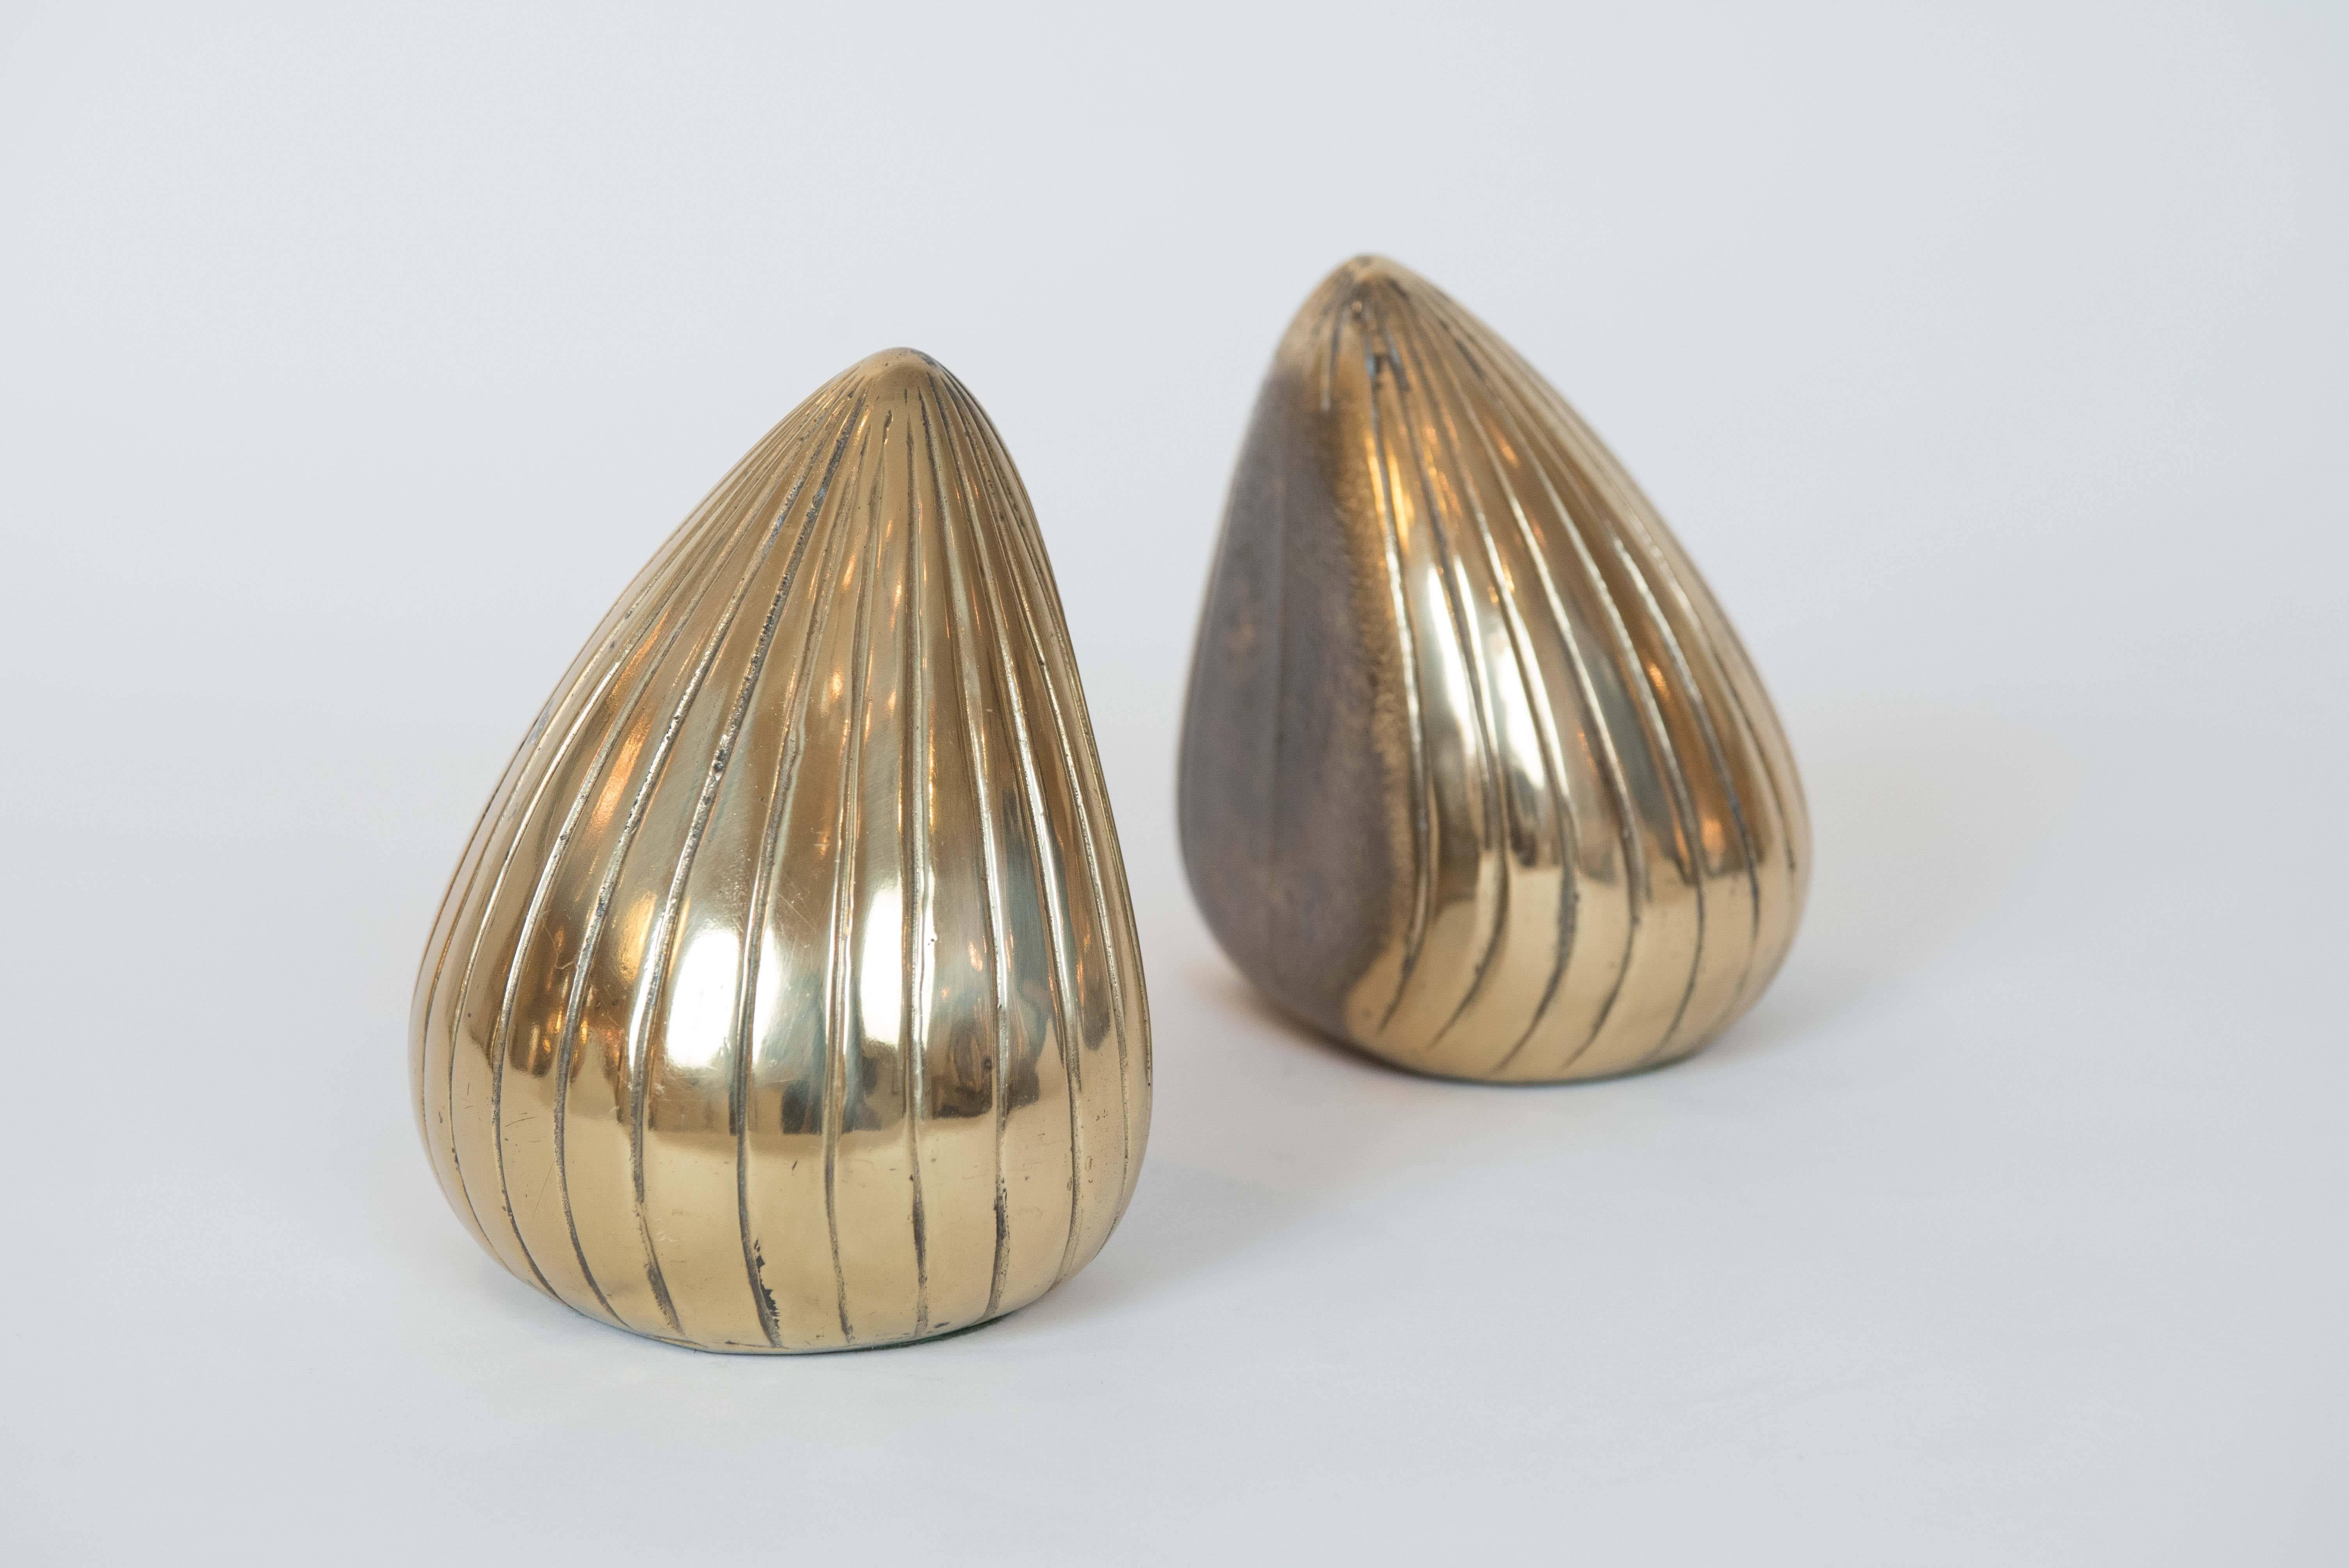 Plated Pair of Brass Bookends by Ben Seibel for Jenfredware, New York